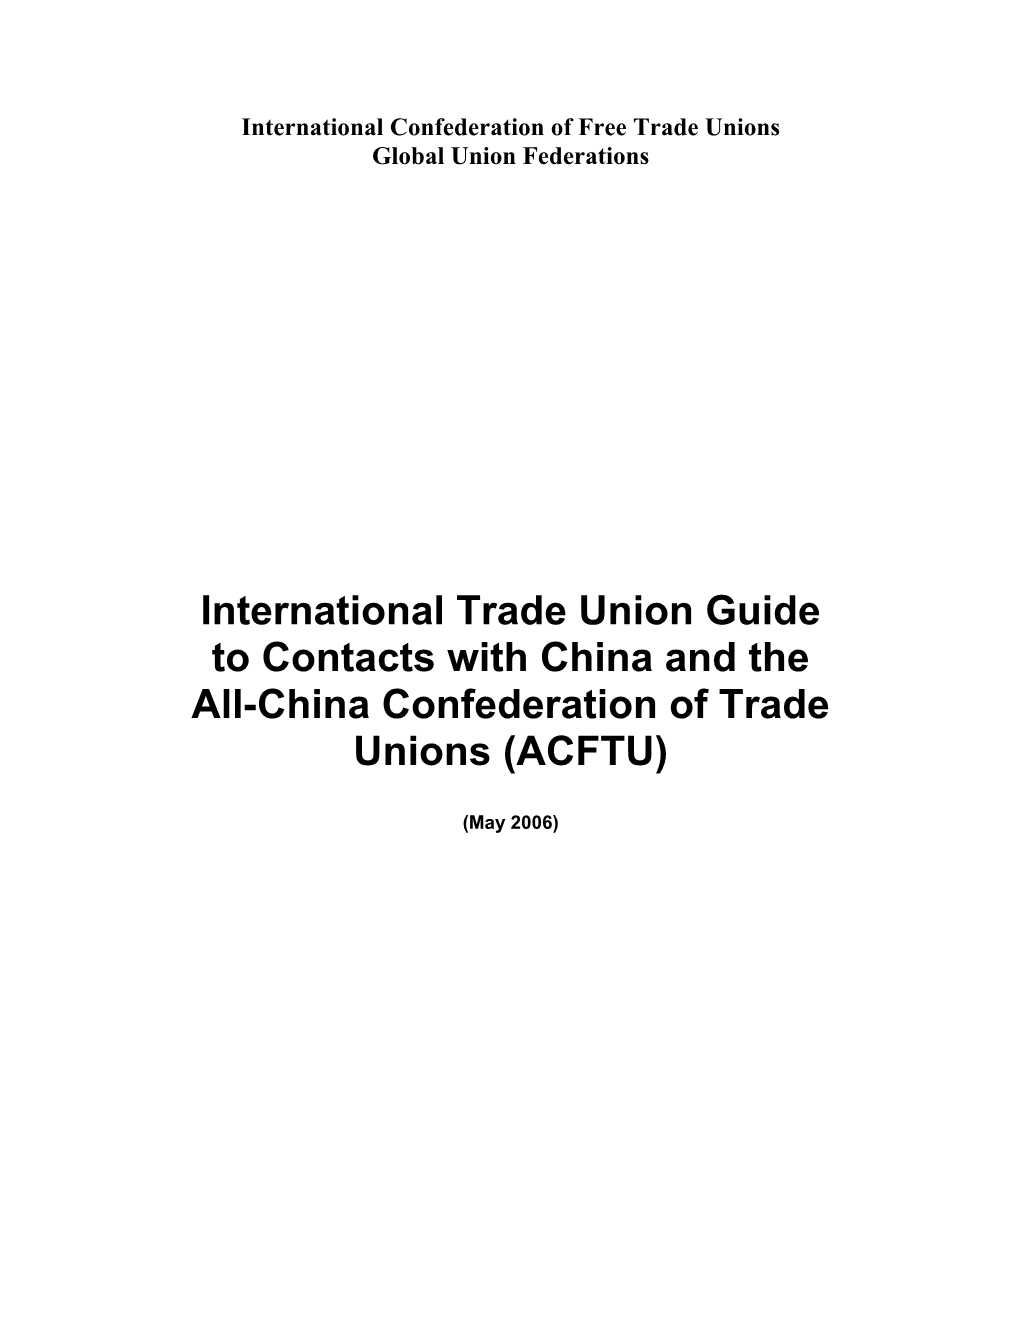 International Trade Union Guide to Contacts with China and the All-China Confederation of Trade Unions (ACFTU)